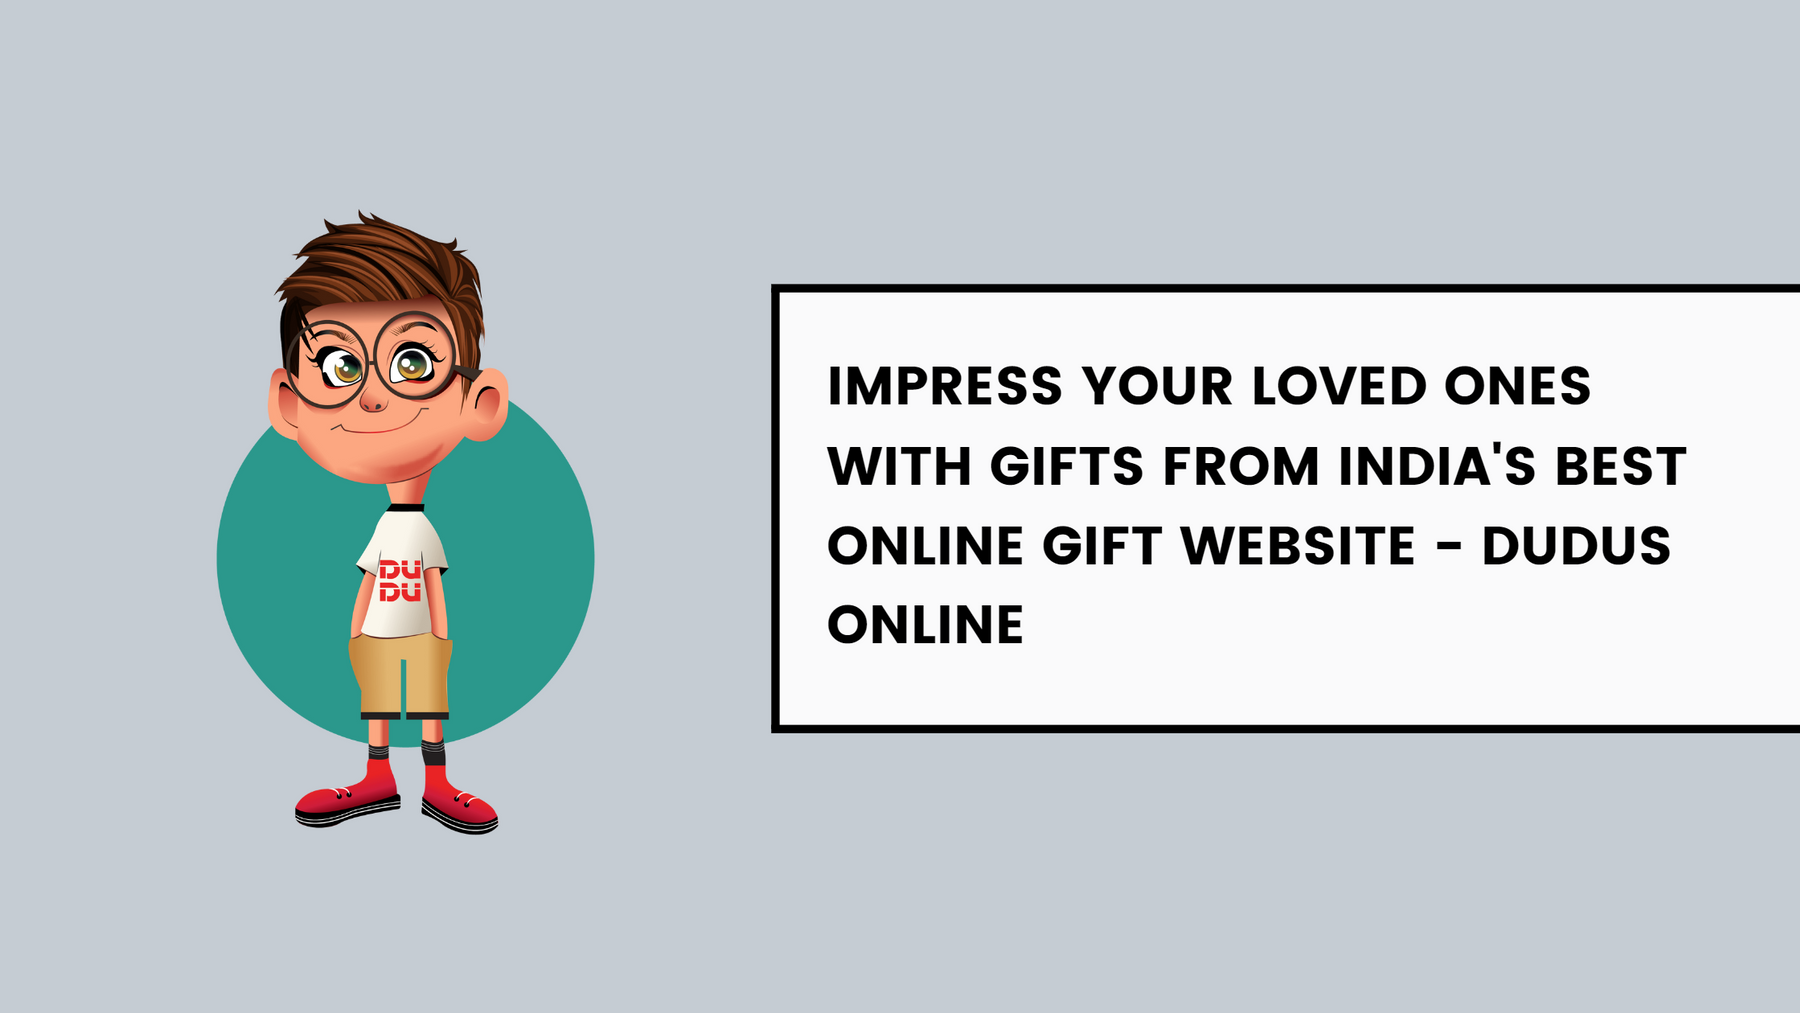 Impress Your Loved Ones With Gifts From India's Best Online Gift Website - Dudus Online